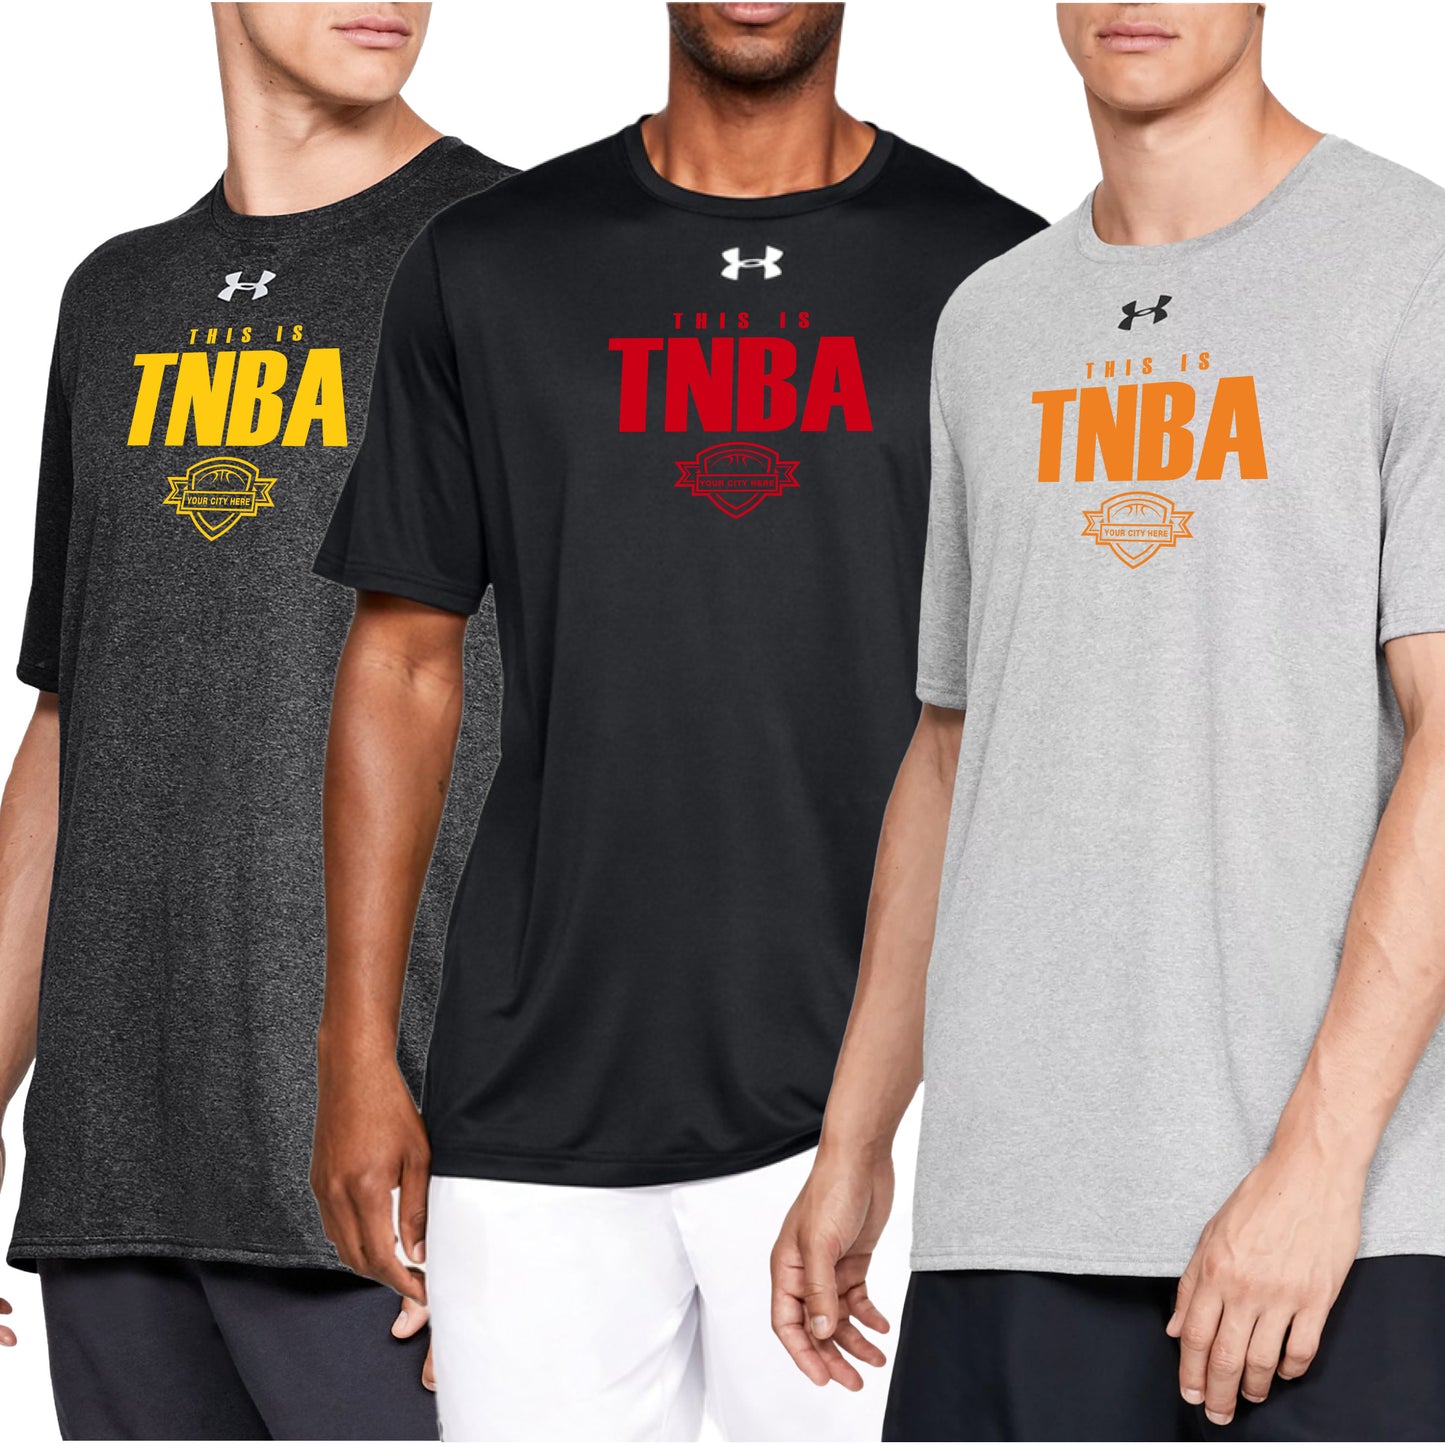 "This Is TNBA"